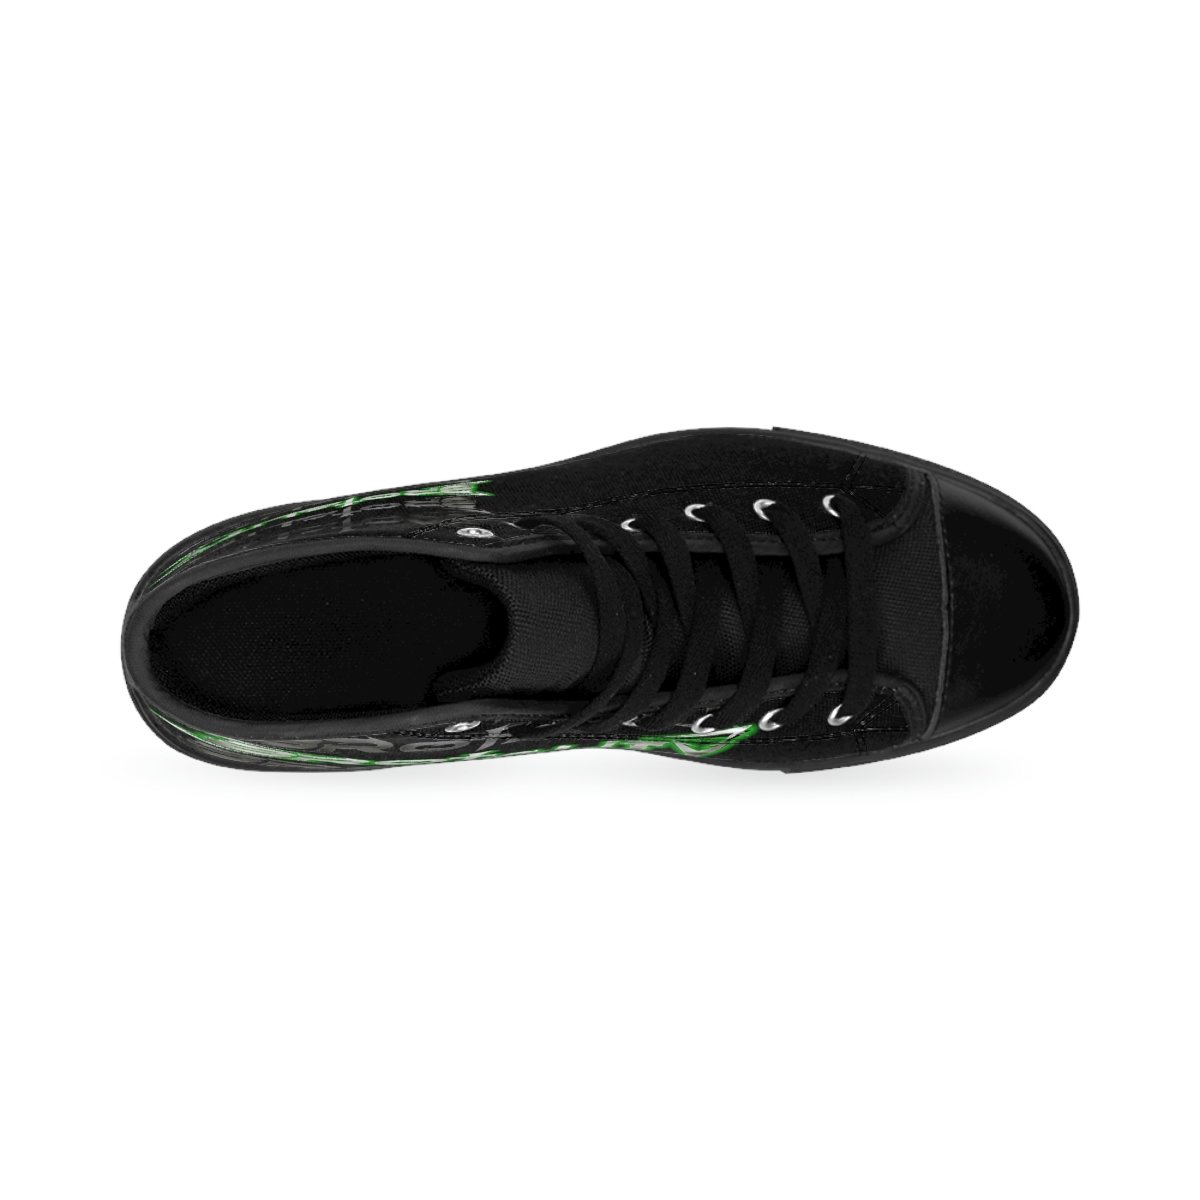 Brotality Stacked Logos Men’s High-top Sneakers